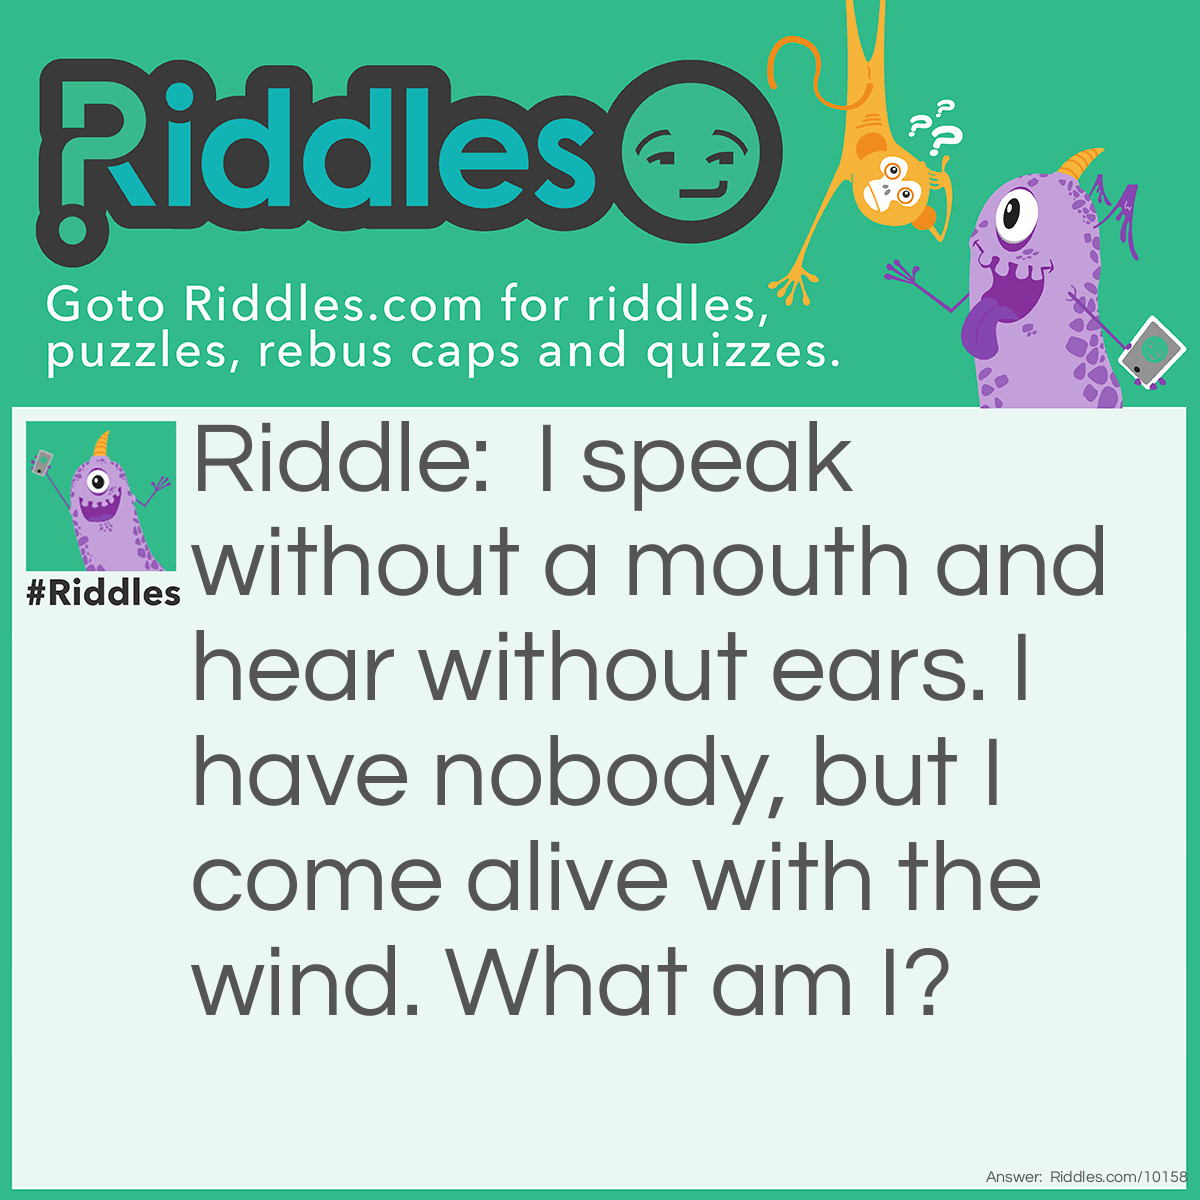 Riddle: I speak without a mouth and hear without ears. I have nobody, but I come alive with the wind. What am I? Answer: An echo.